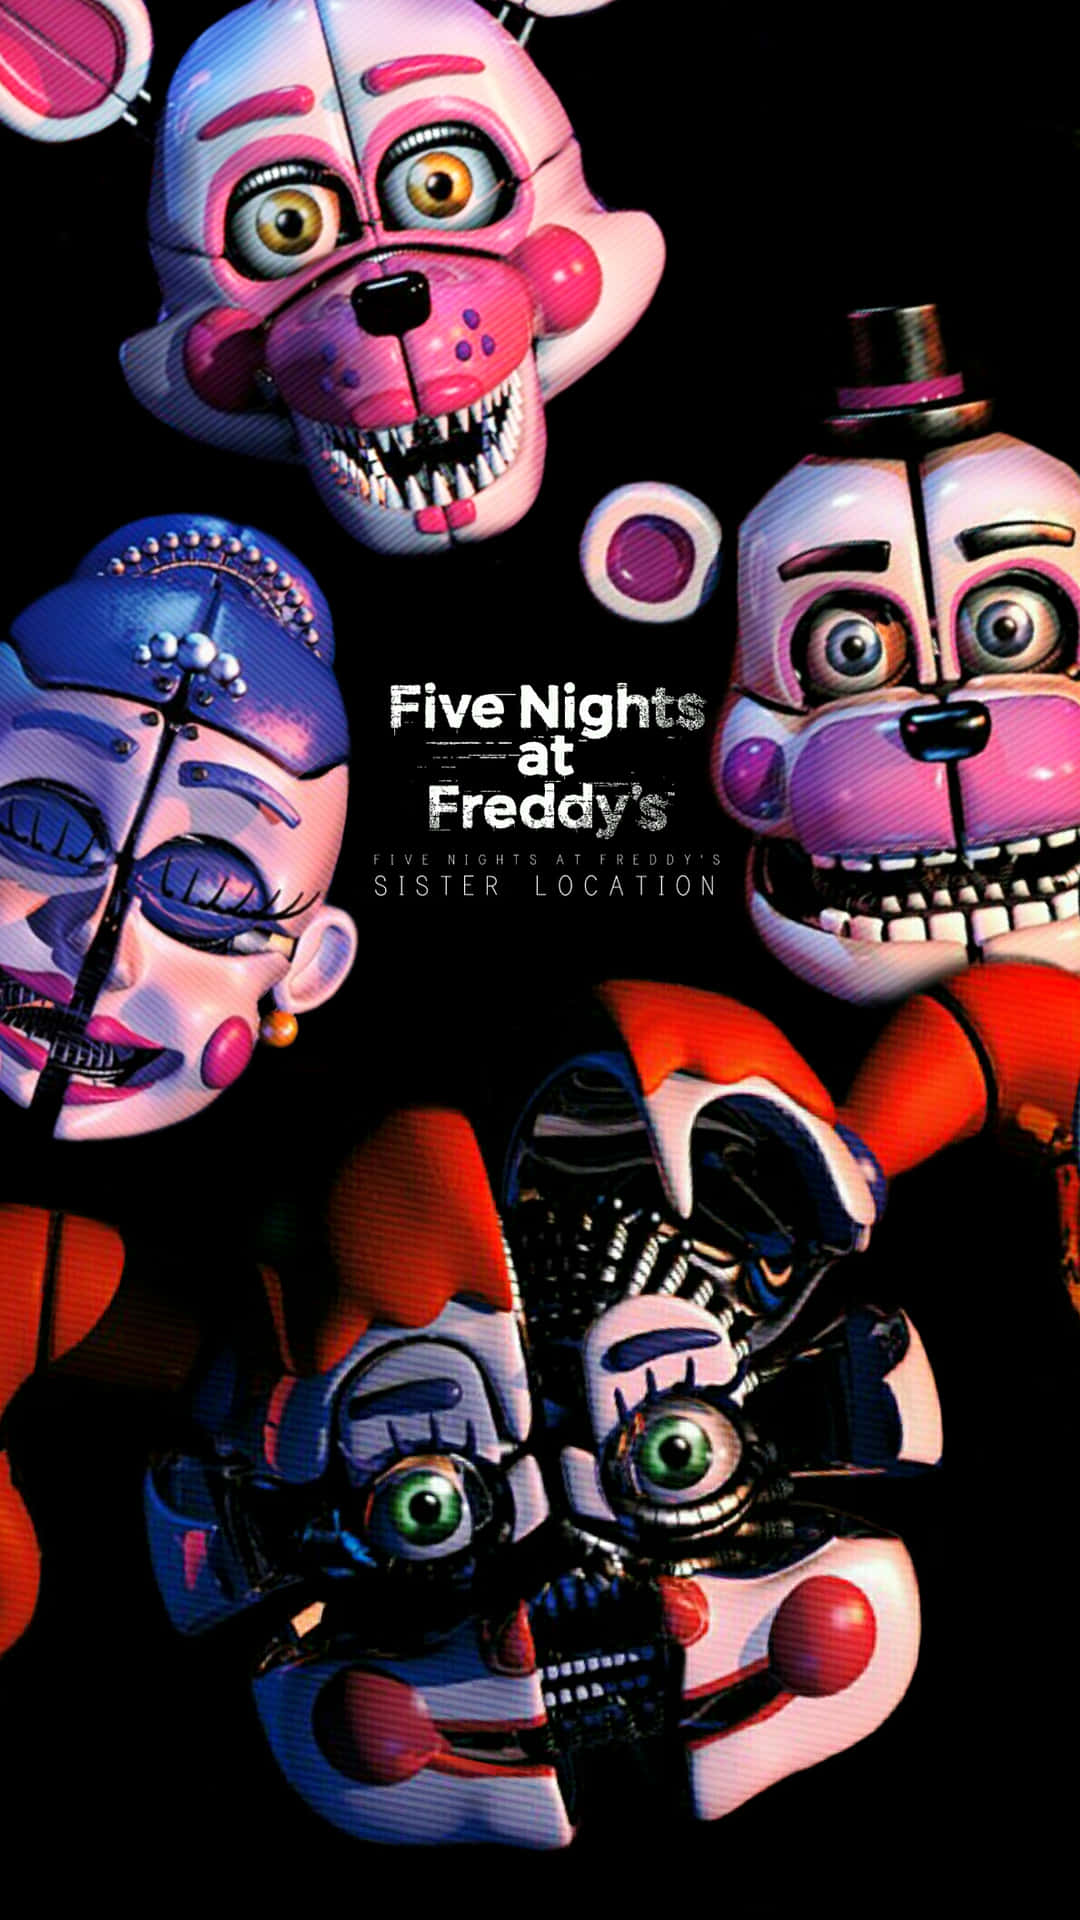 100+] Five Nights At Freddys Sister Location Wallpapers 